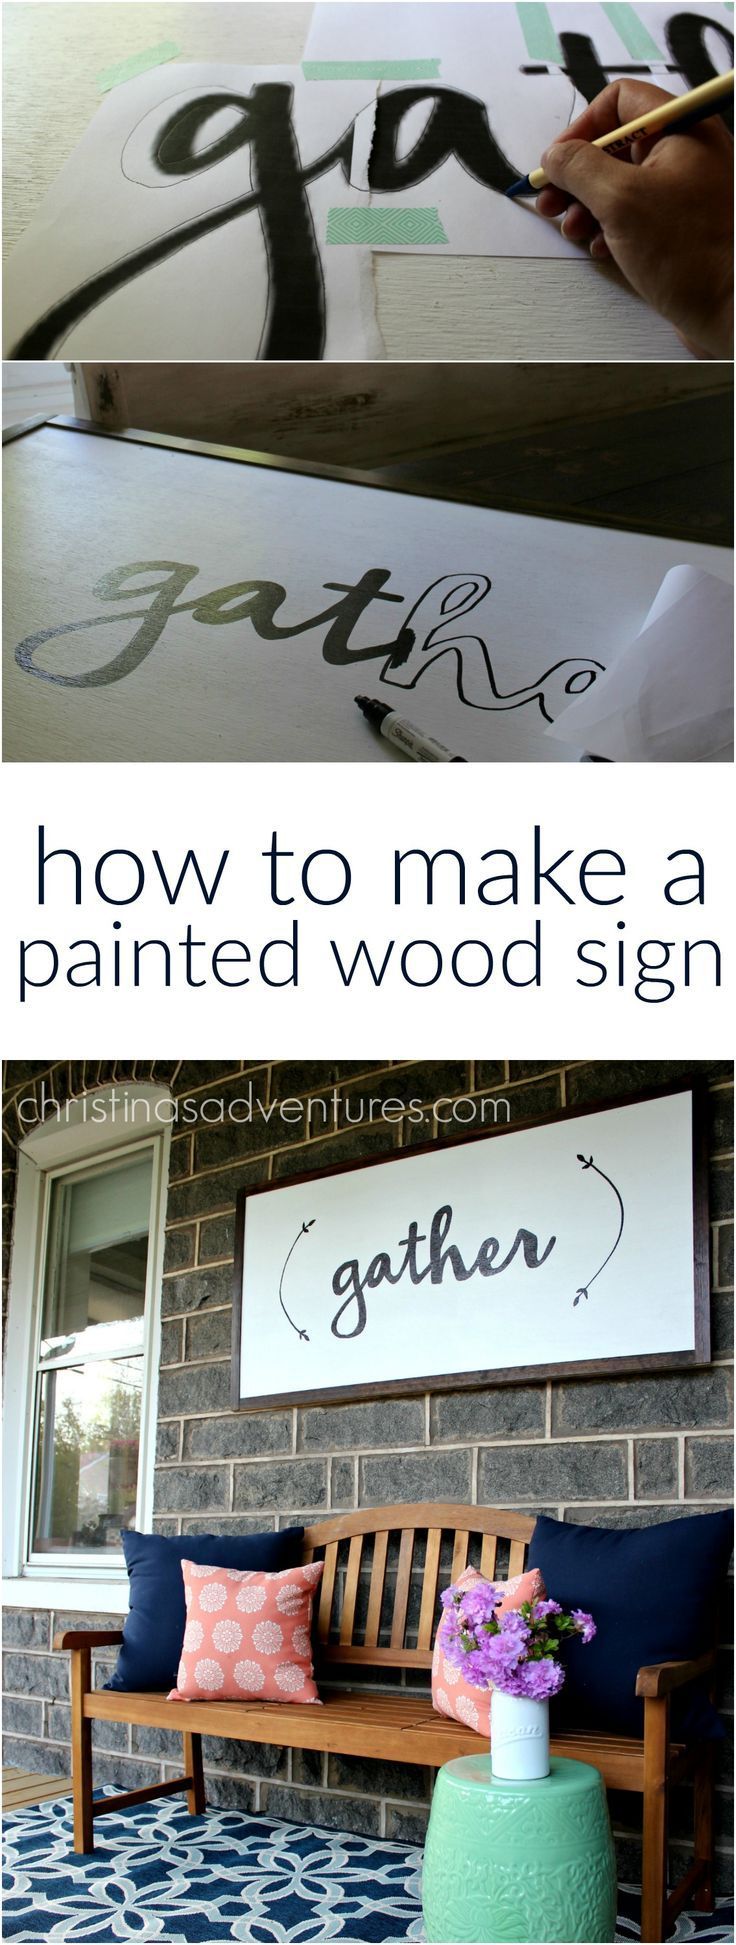 DIY Large Wood Sign Tutorial -   18 diy projects With Wood cleanses
 ideas